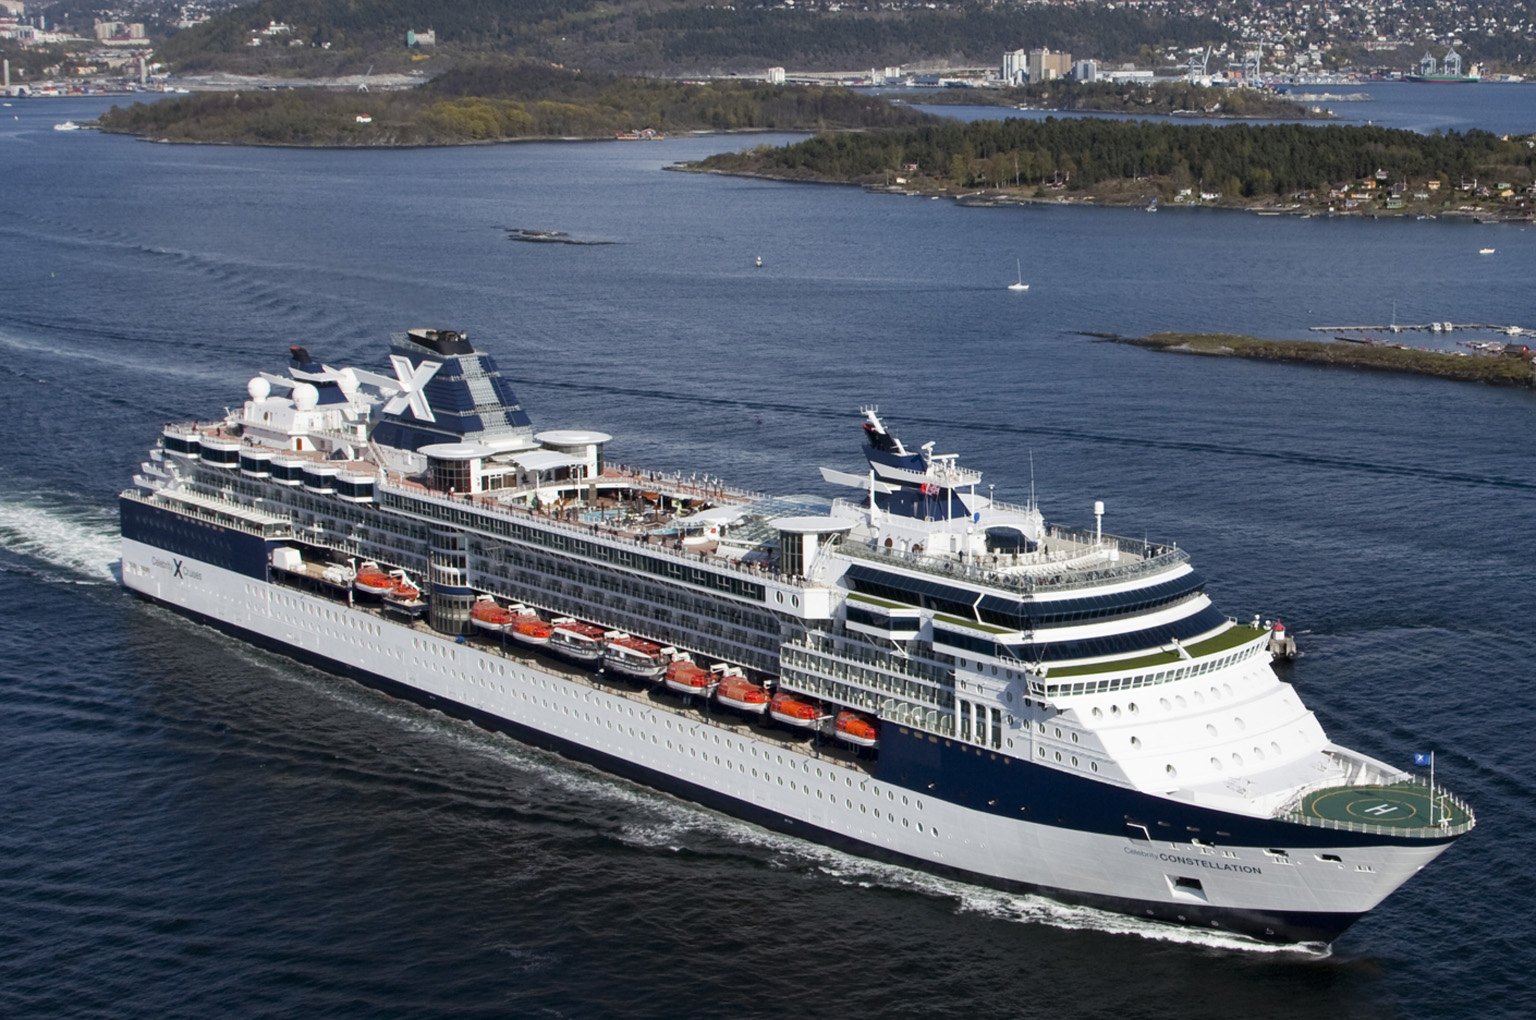 images of celebrity constellation cruise ship